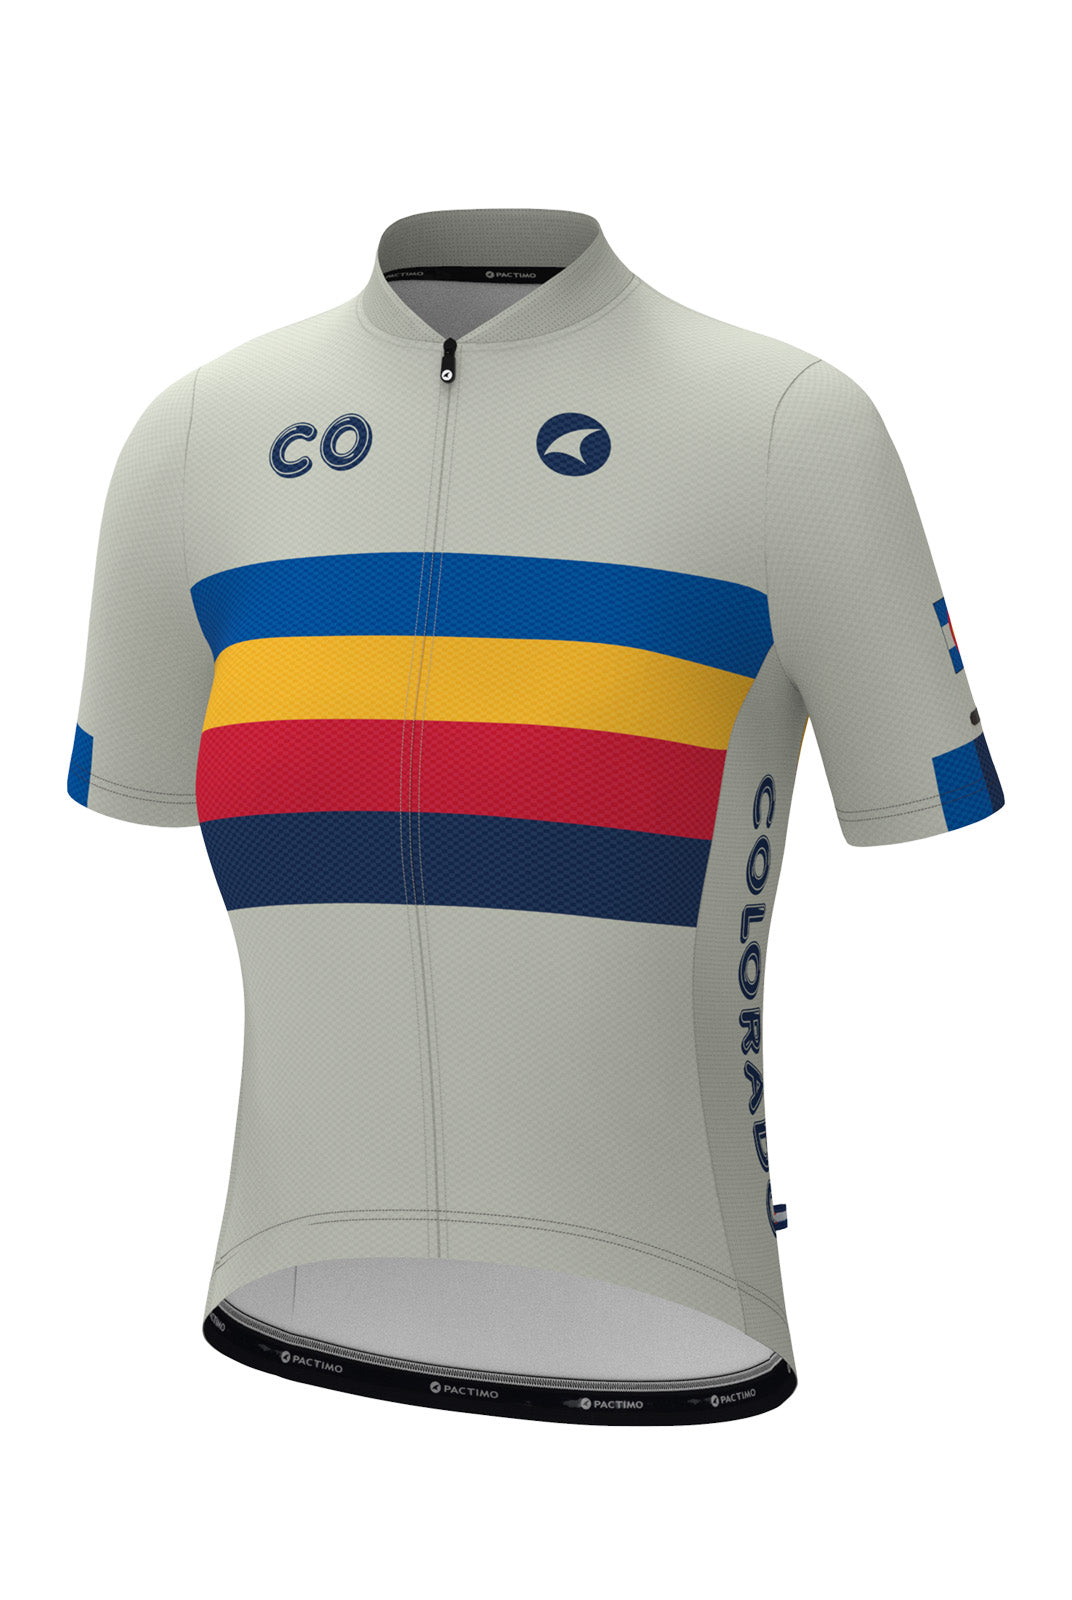 Women's White Retro Colorado Cycling Jersey - Ascent Front View